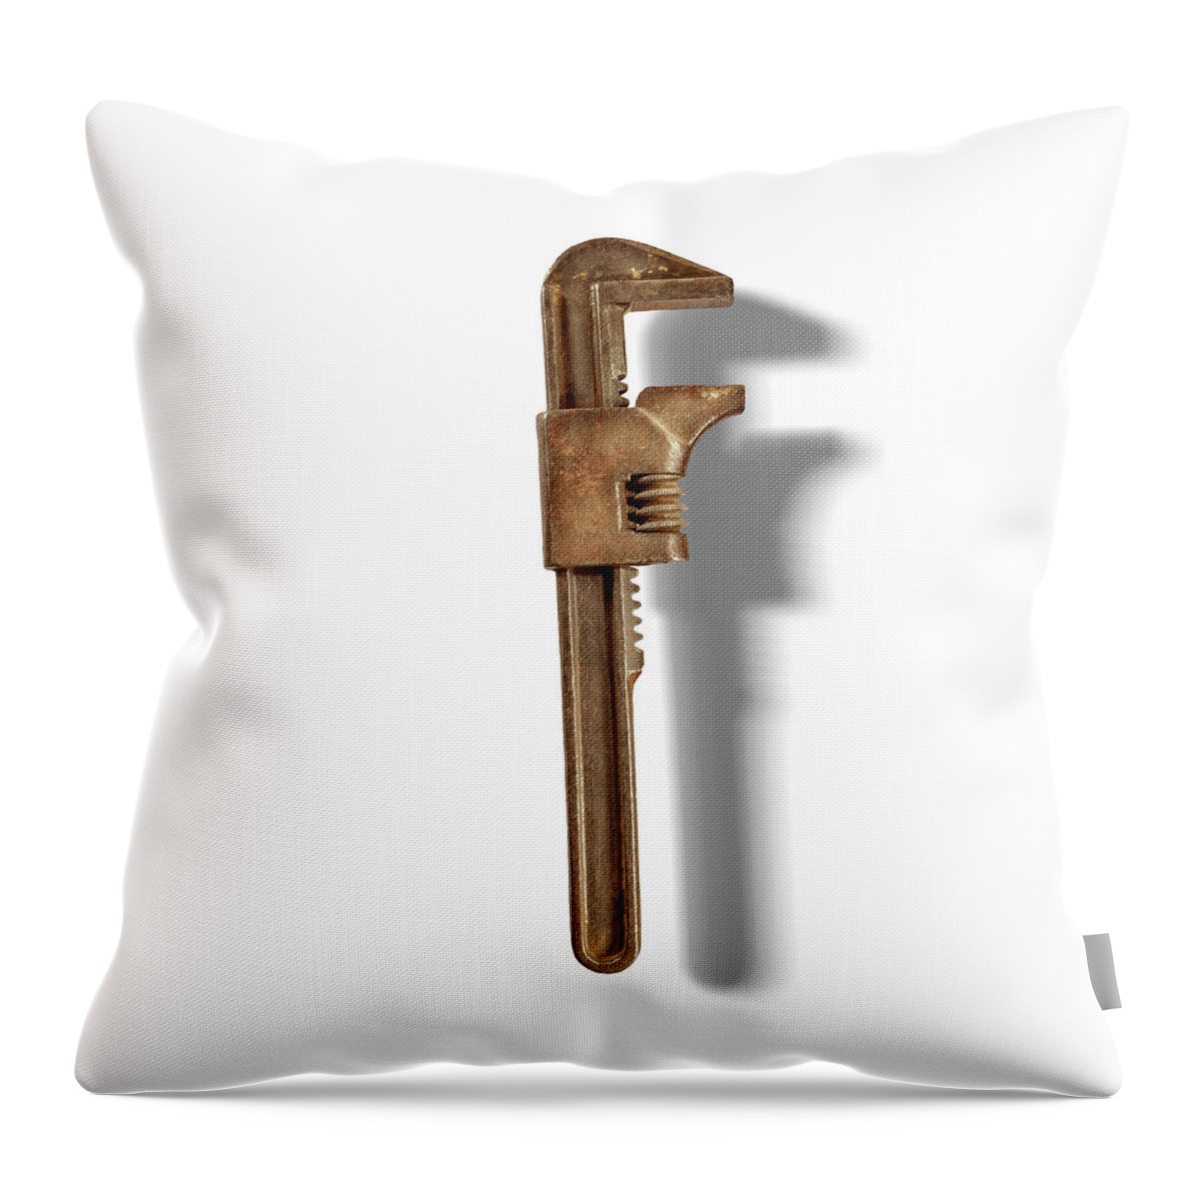 Adjustable Wrench Throw Pillow featuring the photograph Vintage Adjustable Wrench Backside Floating on White by YoPedro